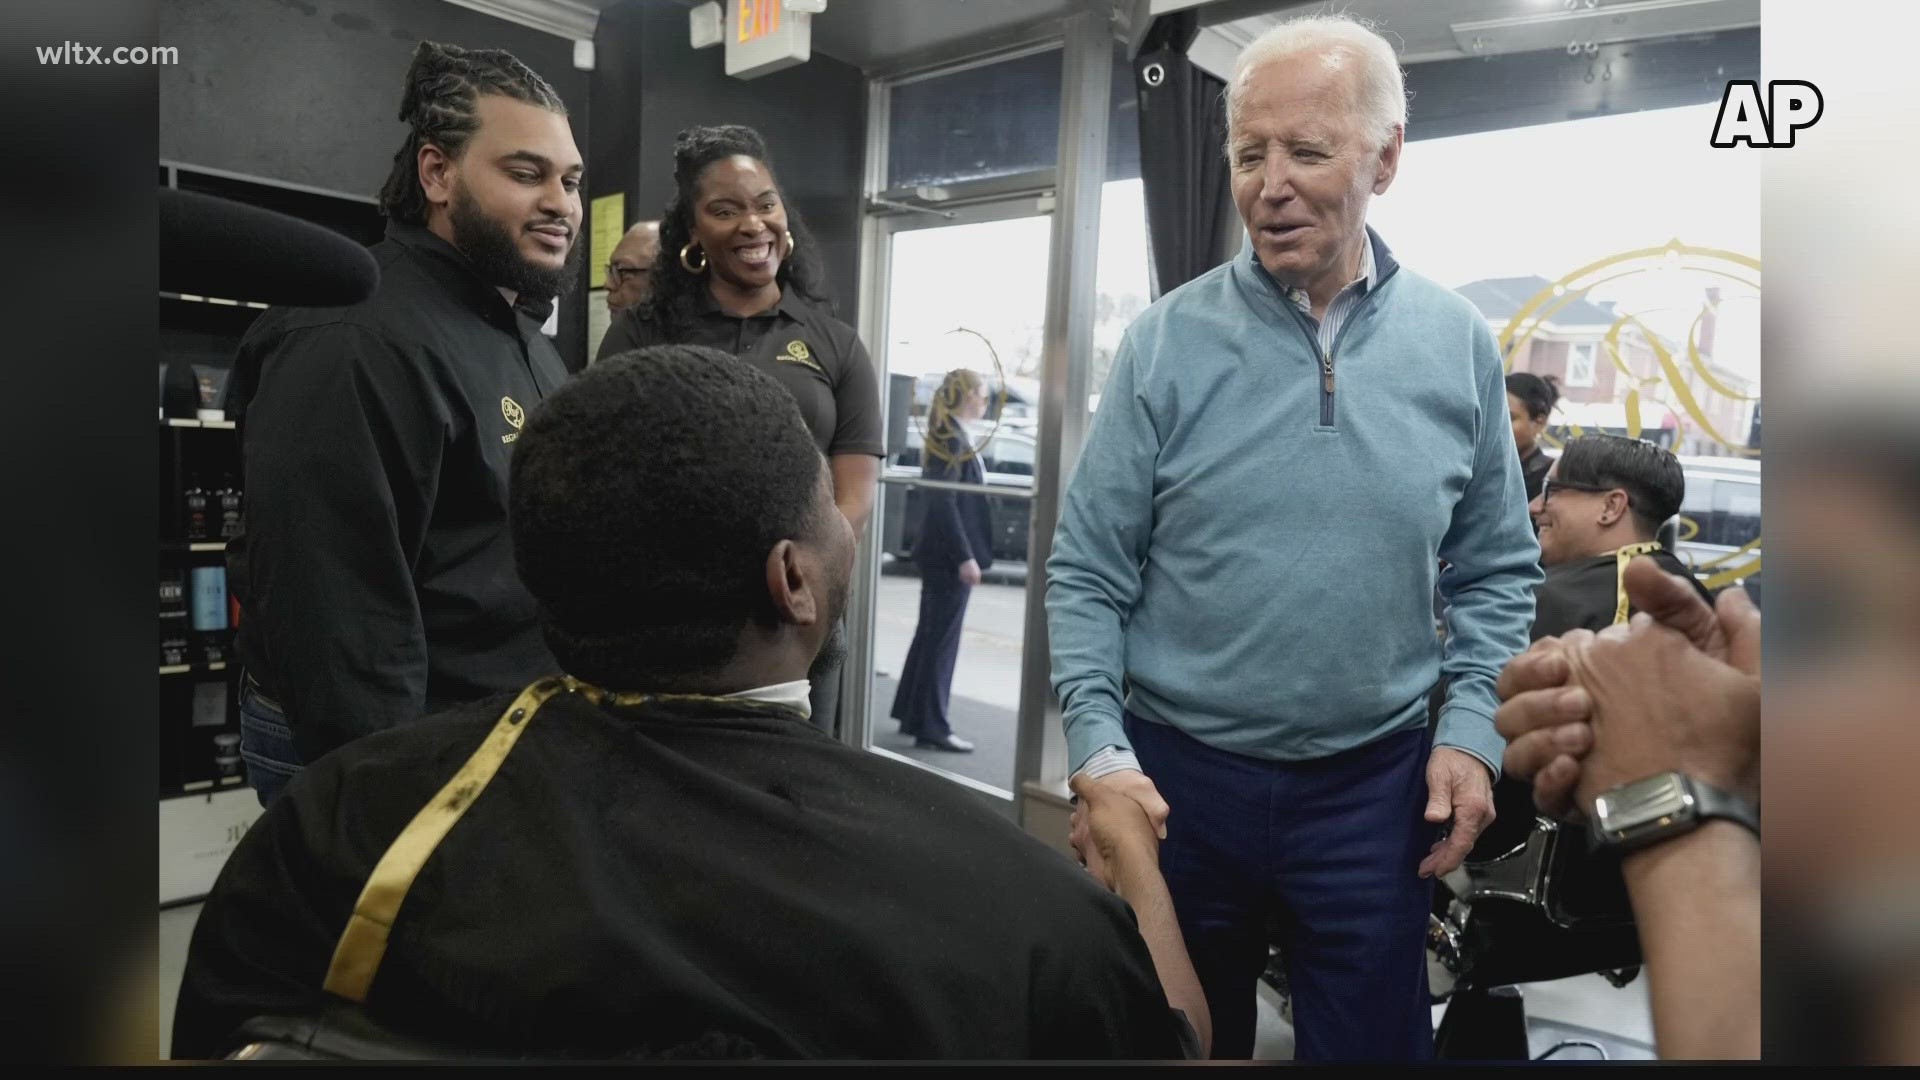 During his recent trip to Columbia, President Biden made a stop at a local business where we spoke with the owners and customers.